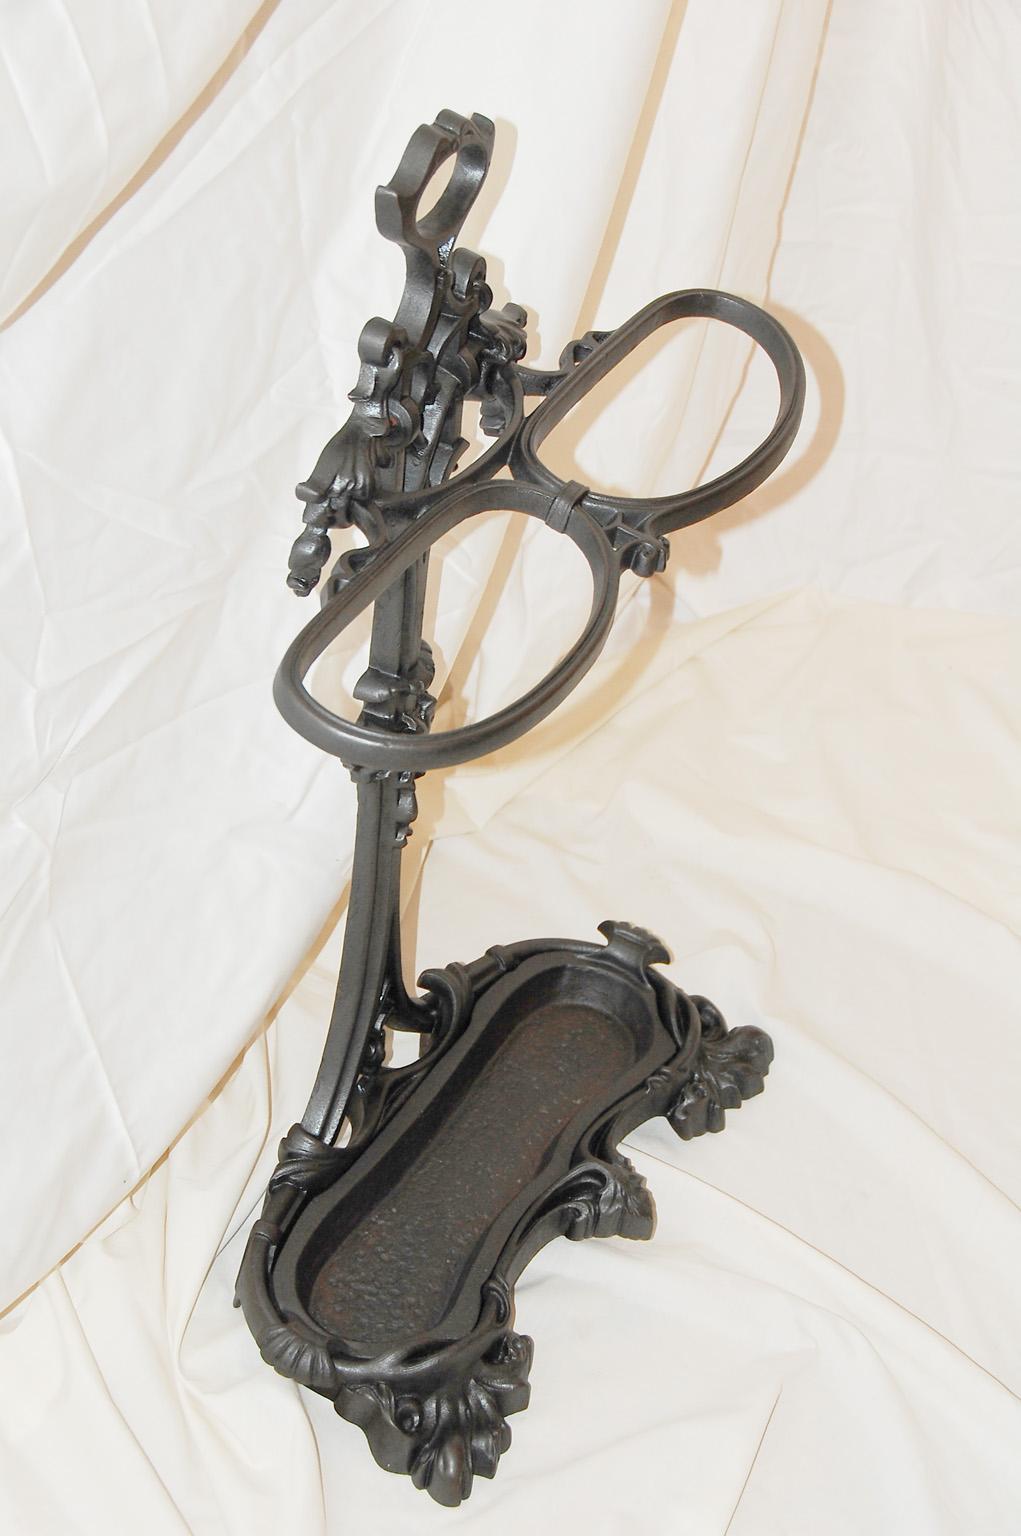 English cast iron victorian umbrella, cane or walking stick stand with separate cast iron drip pan. This substantial stand is crisply cast in iron with leaf and swirl motifs. It is quite heavy so one need not worry about it tipping over, it is very